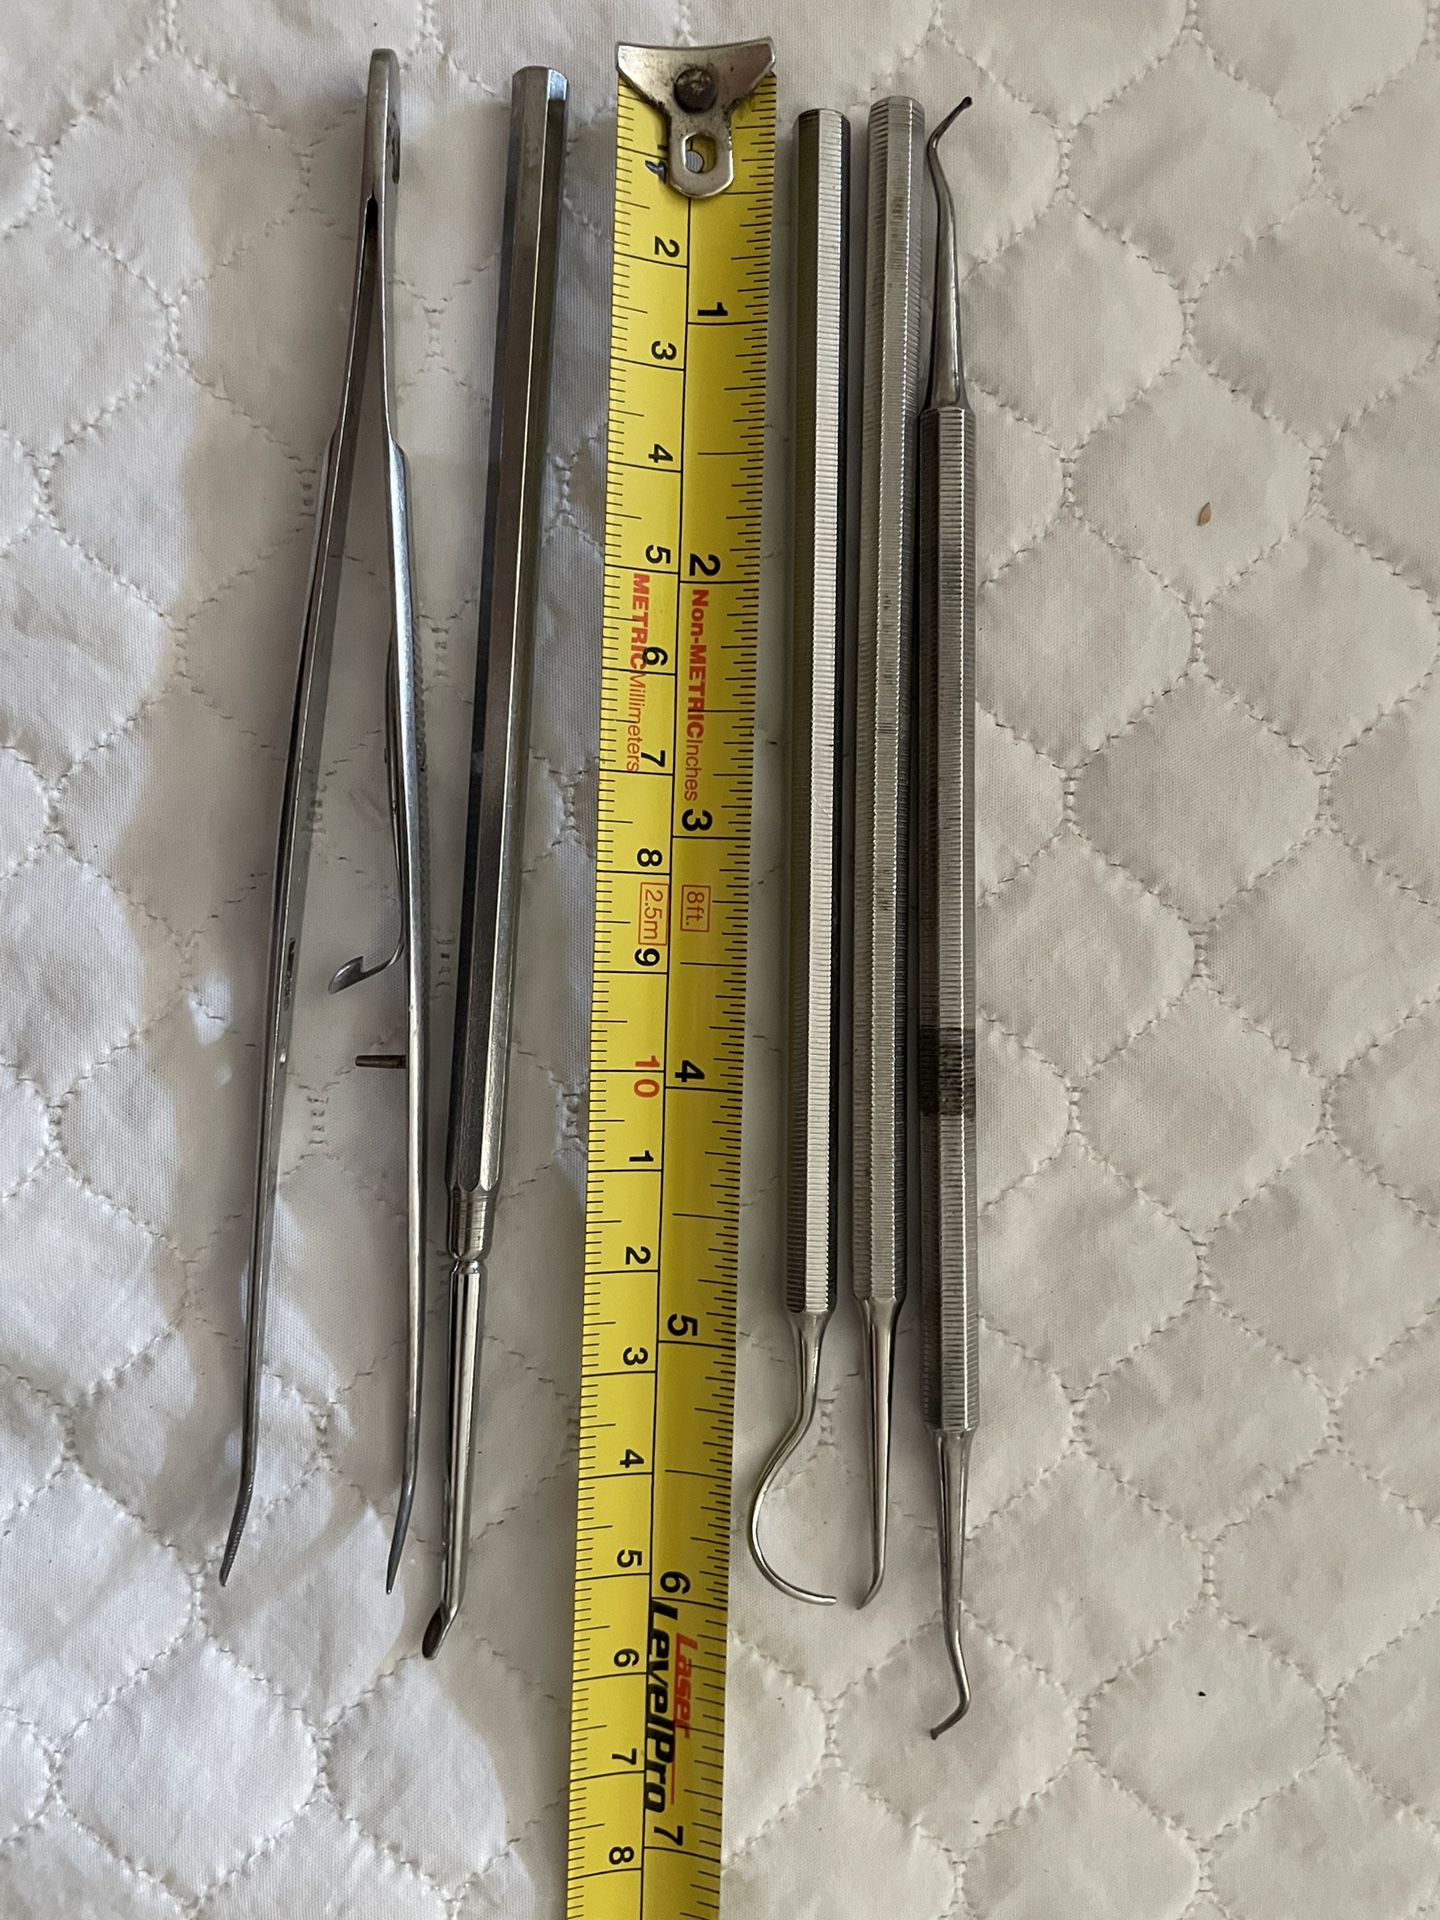 Vintage Stainless Steel Tools For Sculpture/ceramics - Lot Of 5 